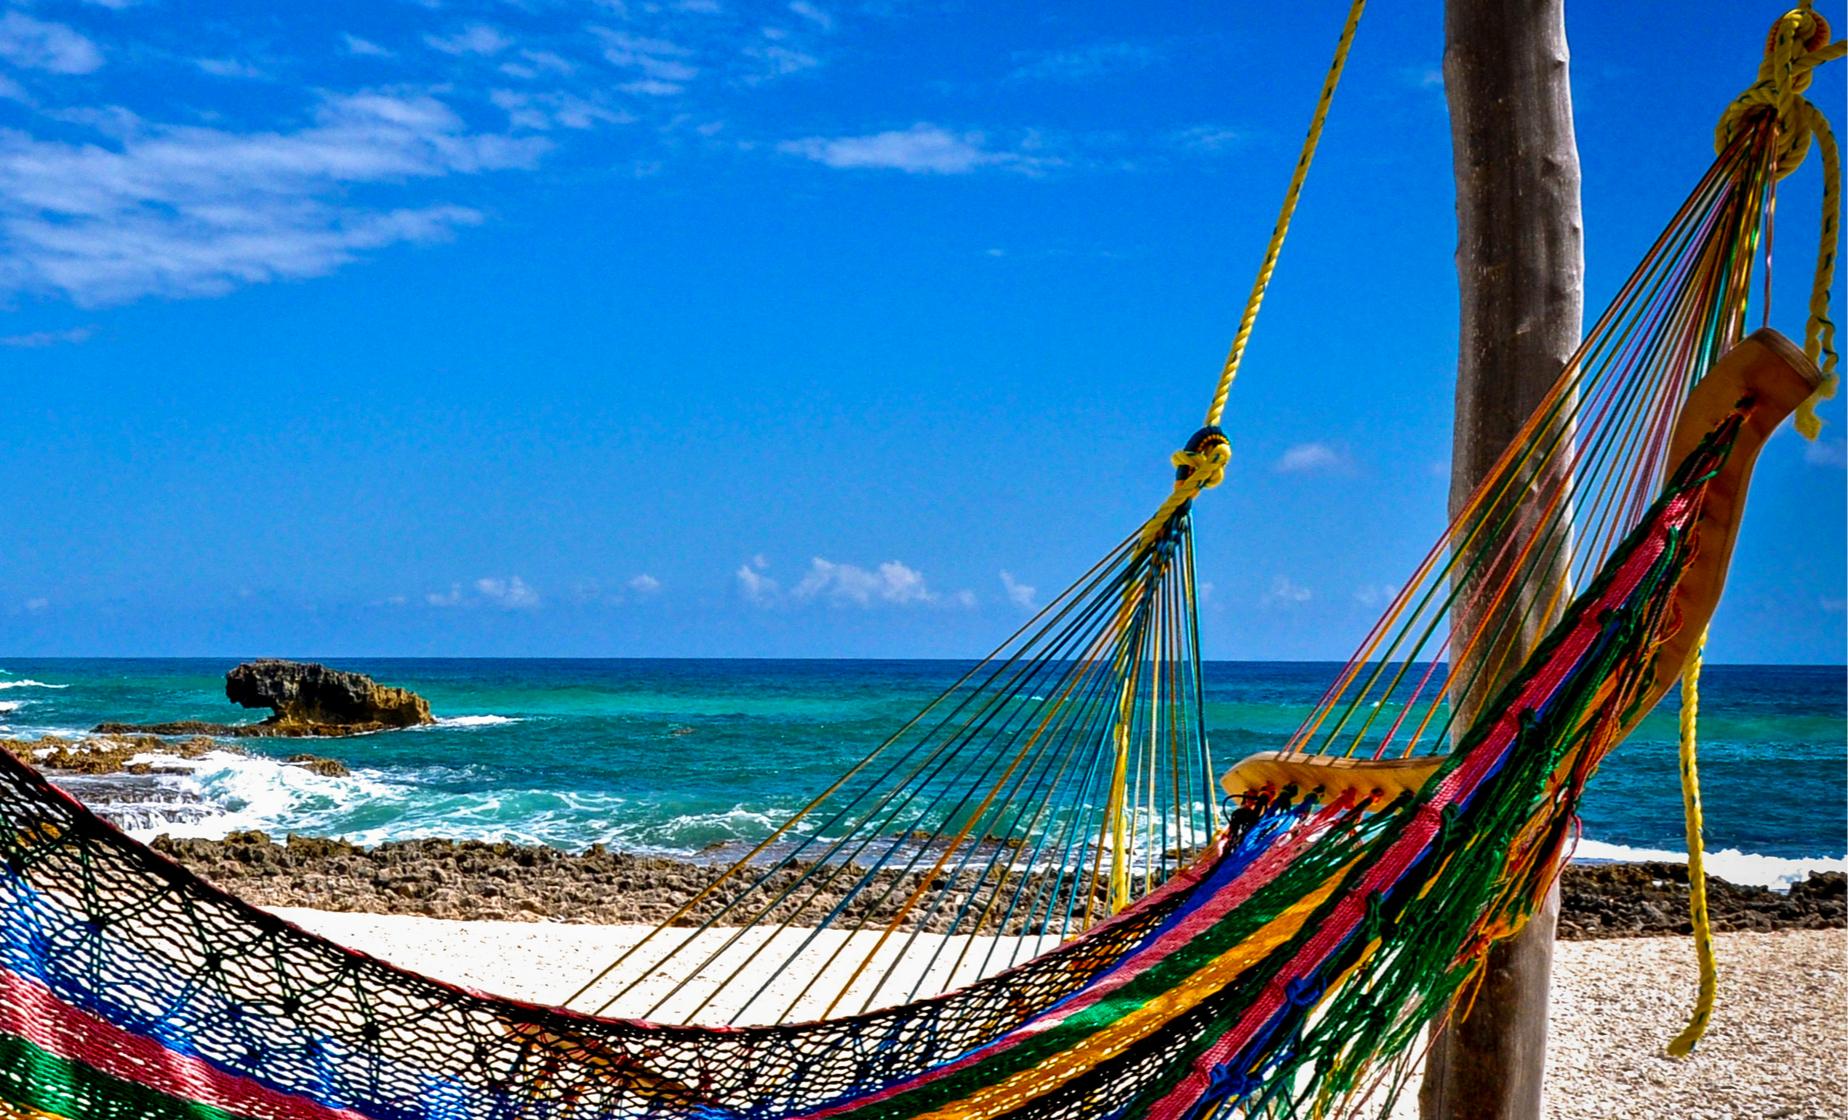 Cozumel Beach, Culture, Food and Wild Side